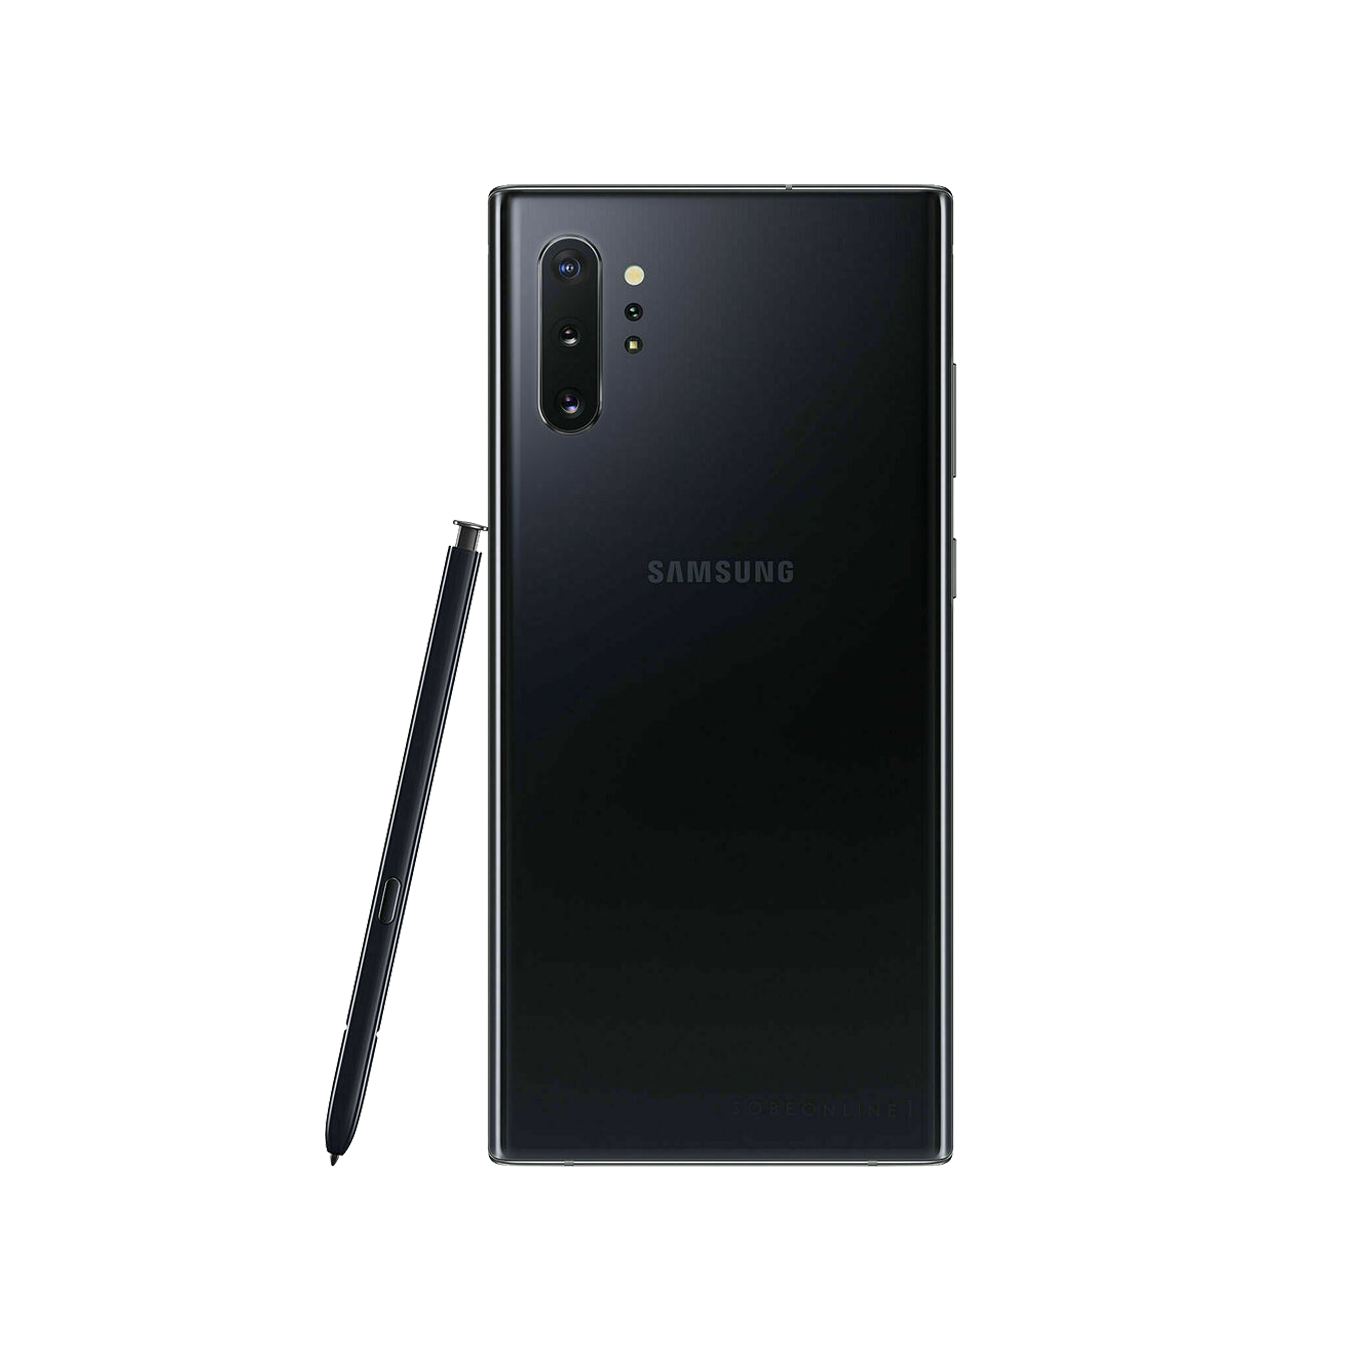 Samsung Galaxy Note 10 Plus IMEI repair service to fix bad or blacklisted IMEI, ensuring full functionality and connectivity, available at cleanimei.com